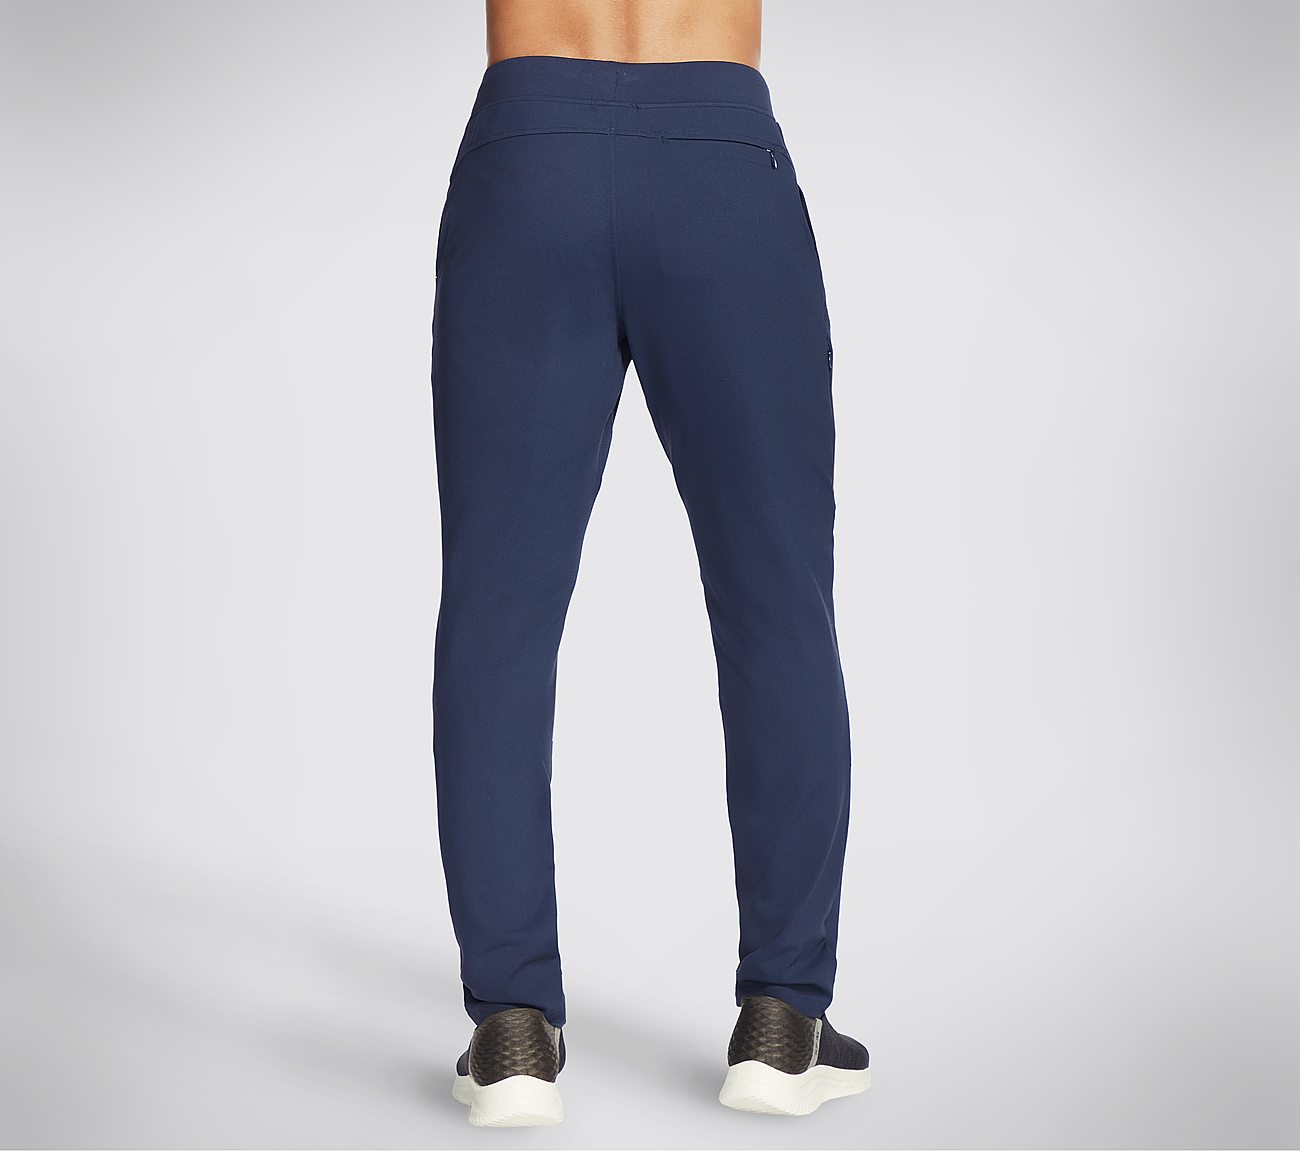 THE GOWALK PANT CONTROLLER, NNNAVY Apparel Top View